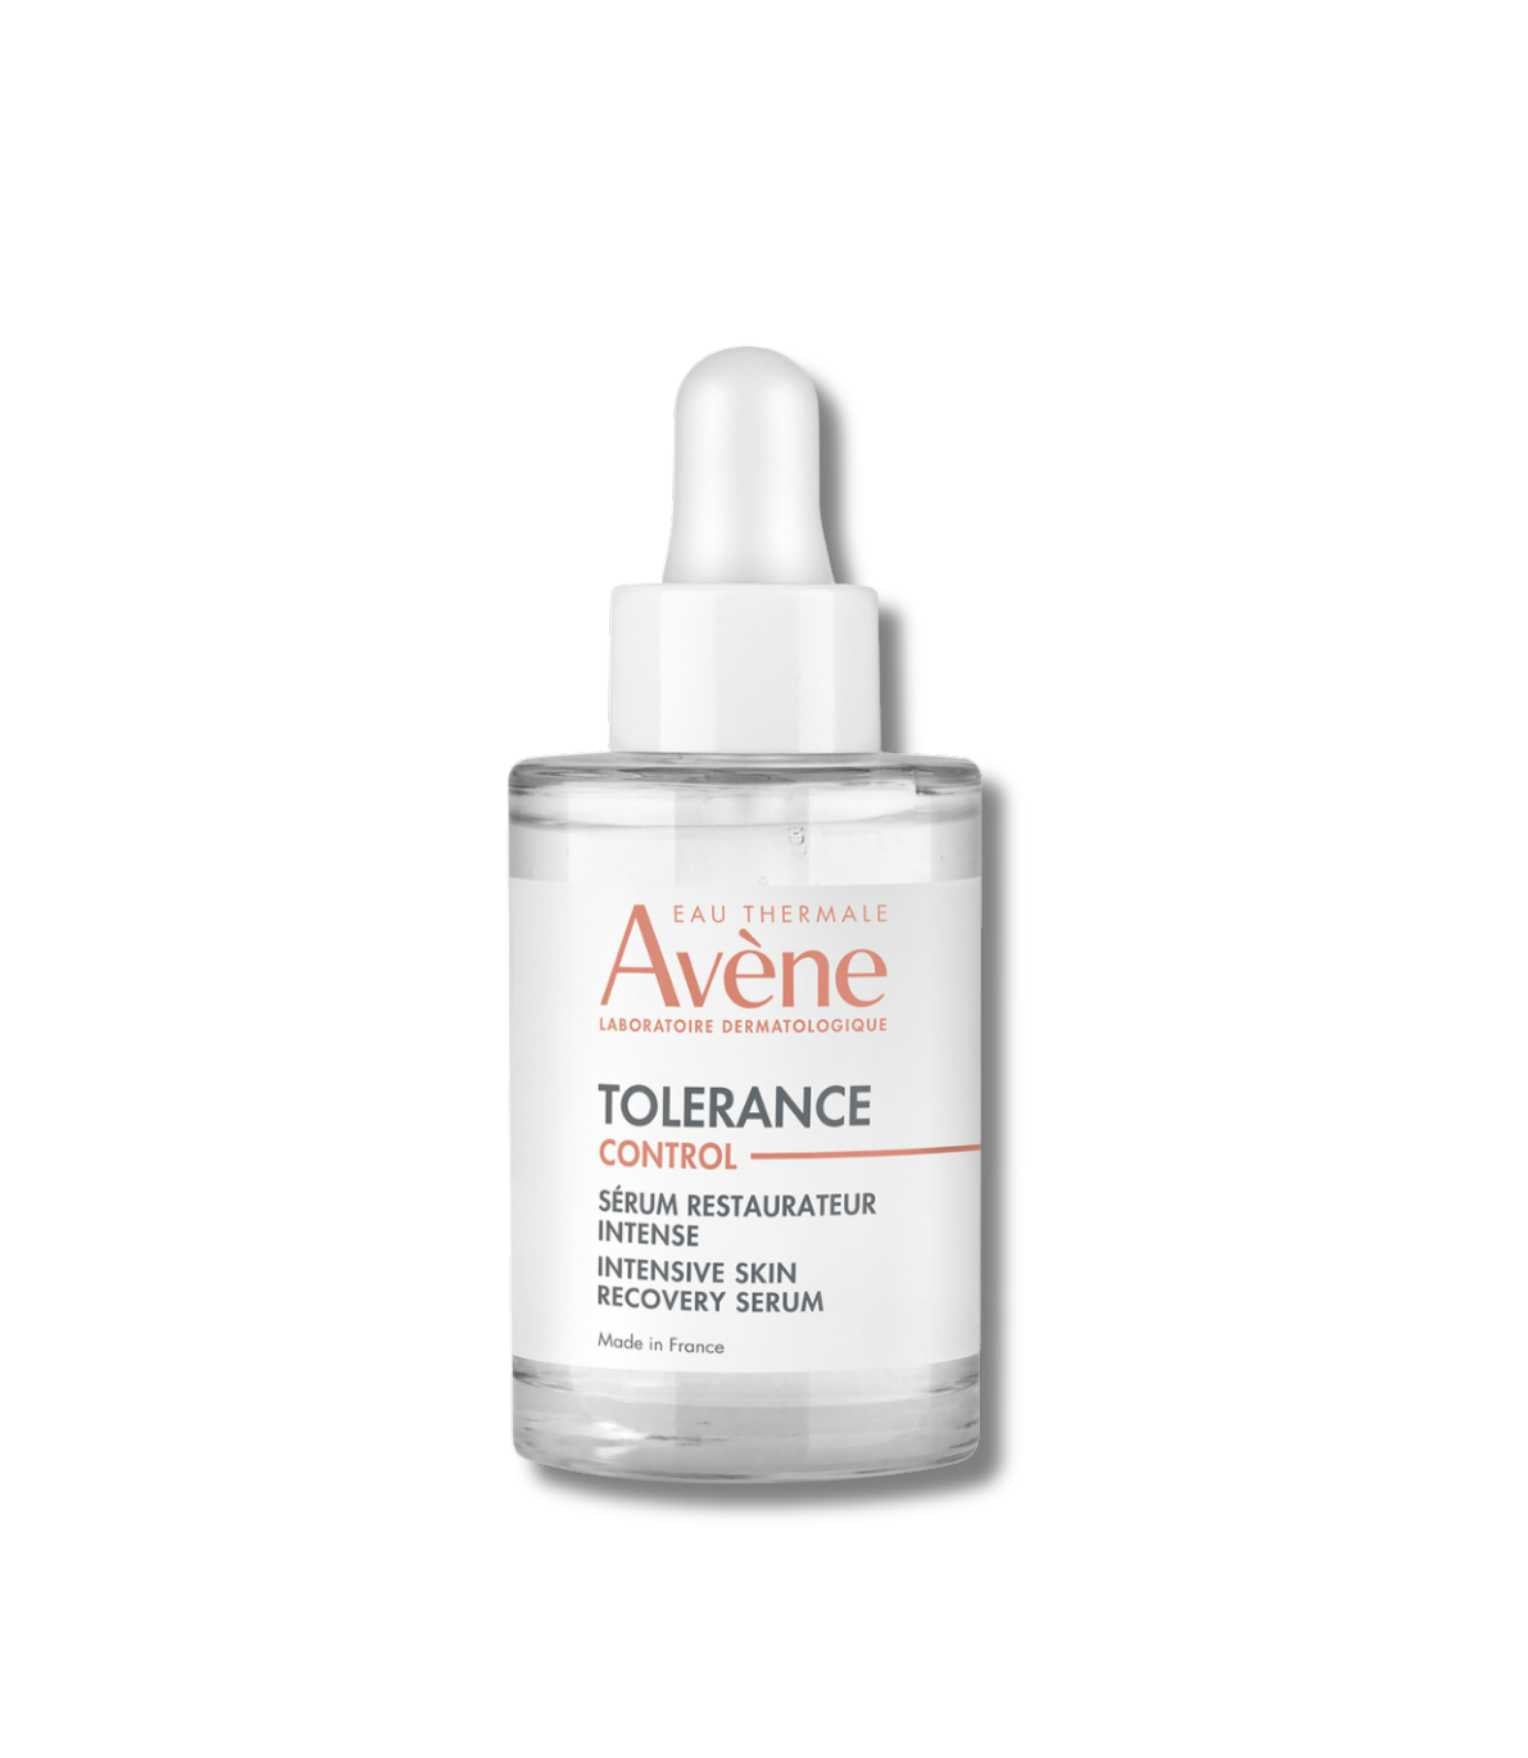 Tolerance Control Serum 10ml when you buy 2 Avene products - French Beauty Co.